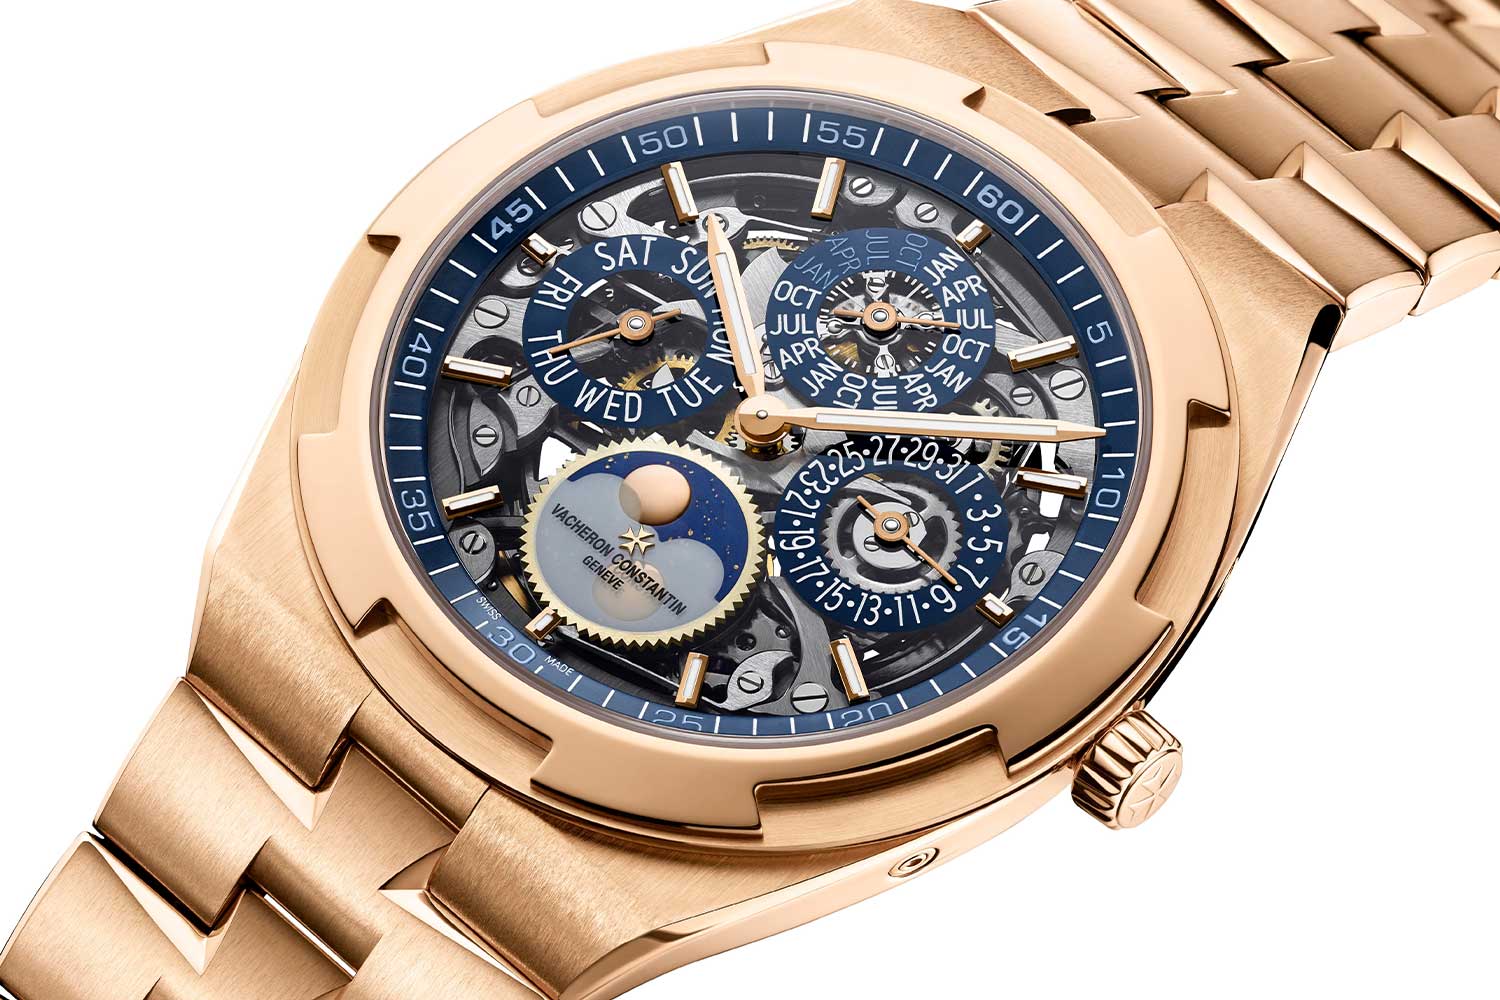 Overseas Perpetual Calendar Ultra-Thin Skeleton in 18K 5N pink gold with a blue accents on the skeleton dial